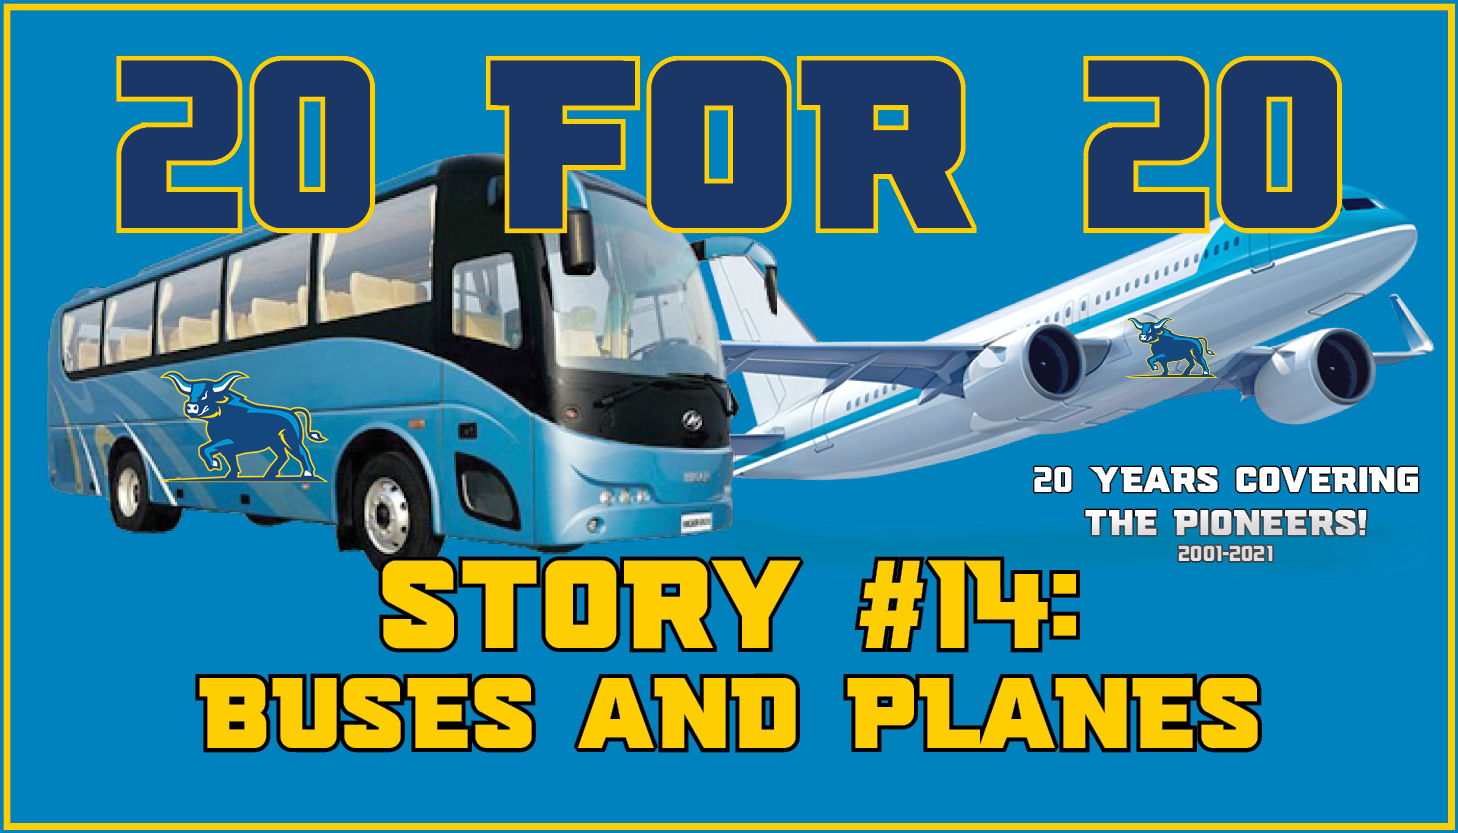 20 for 20 - Buses and Planes - picture features a bus and a plane